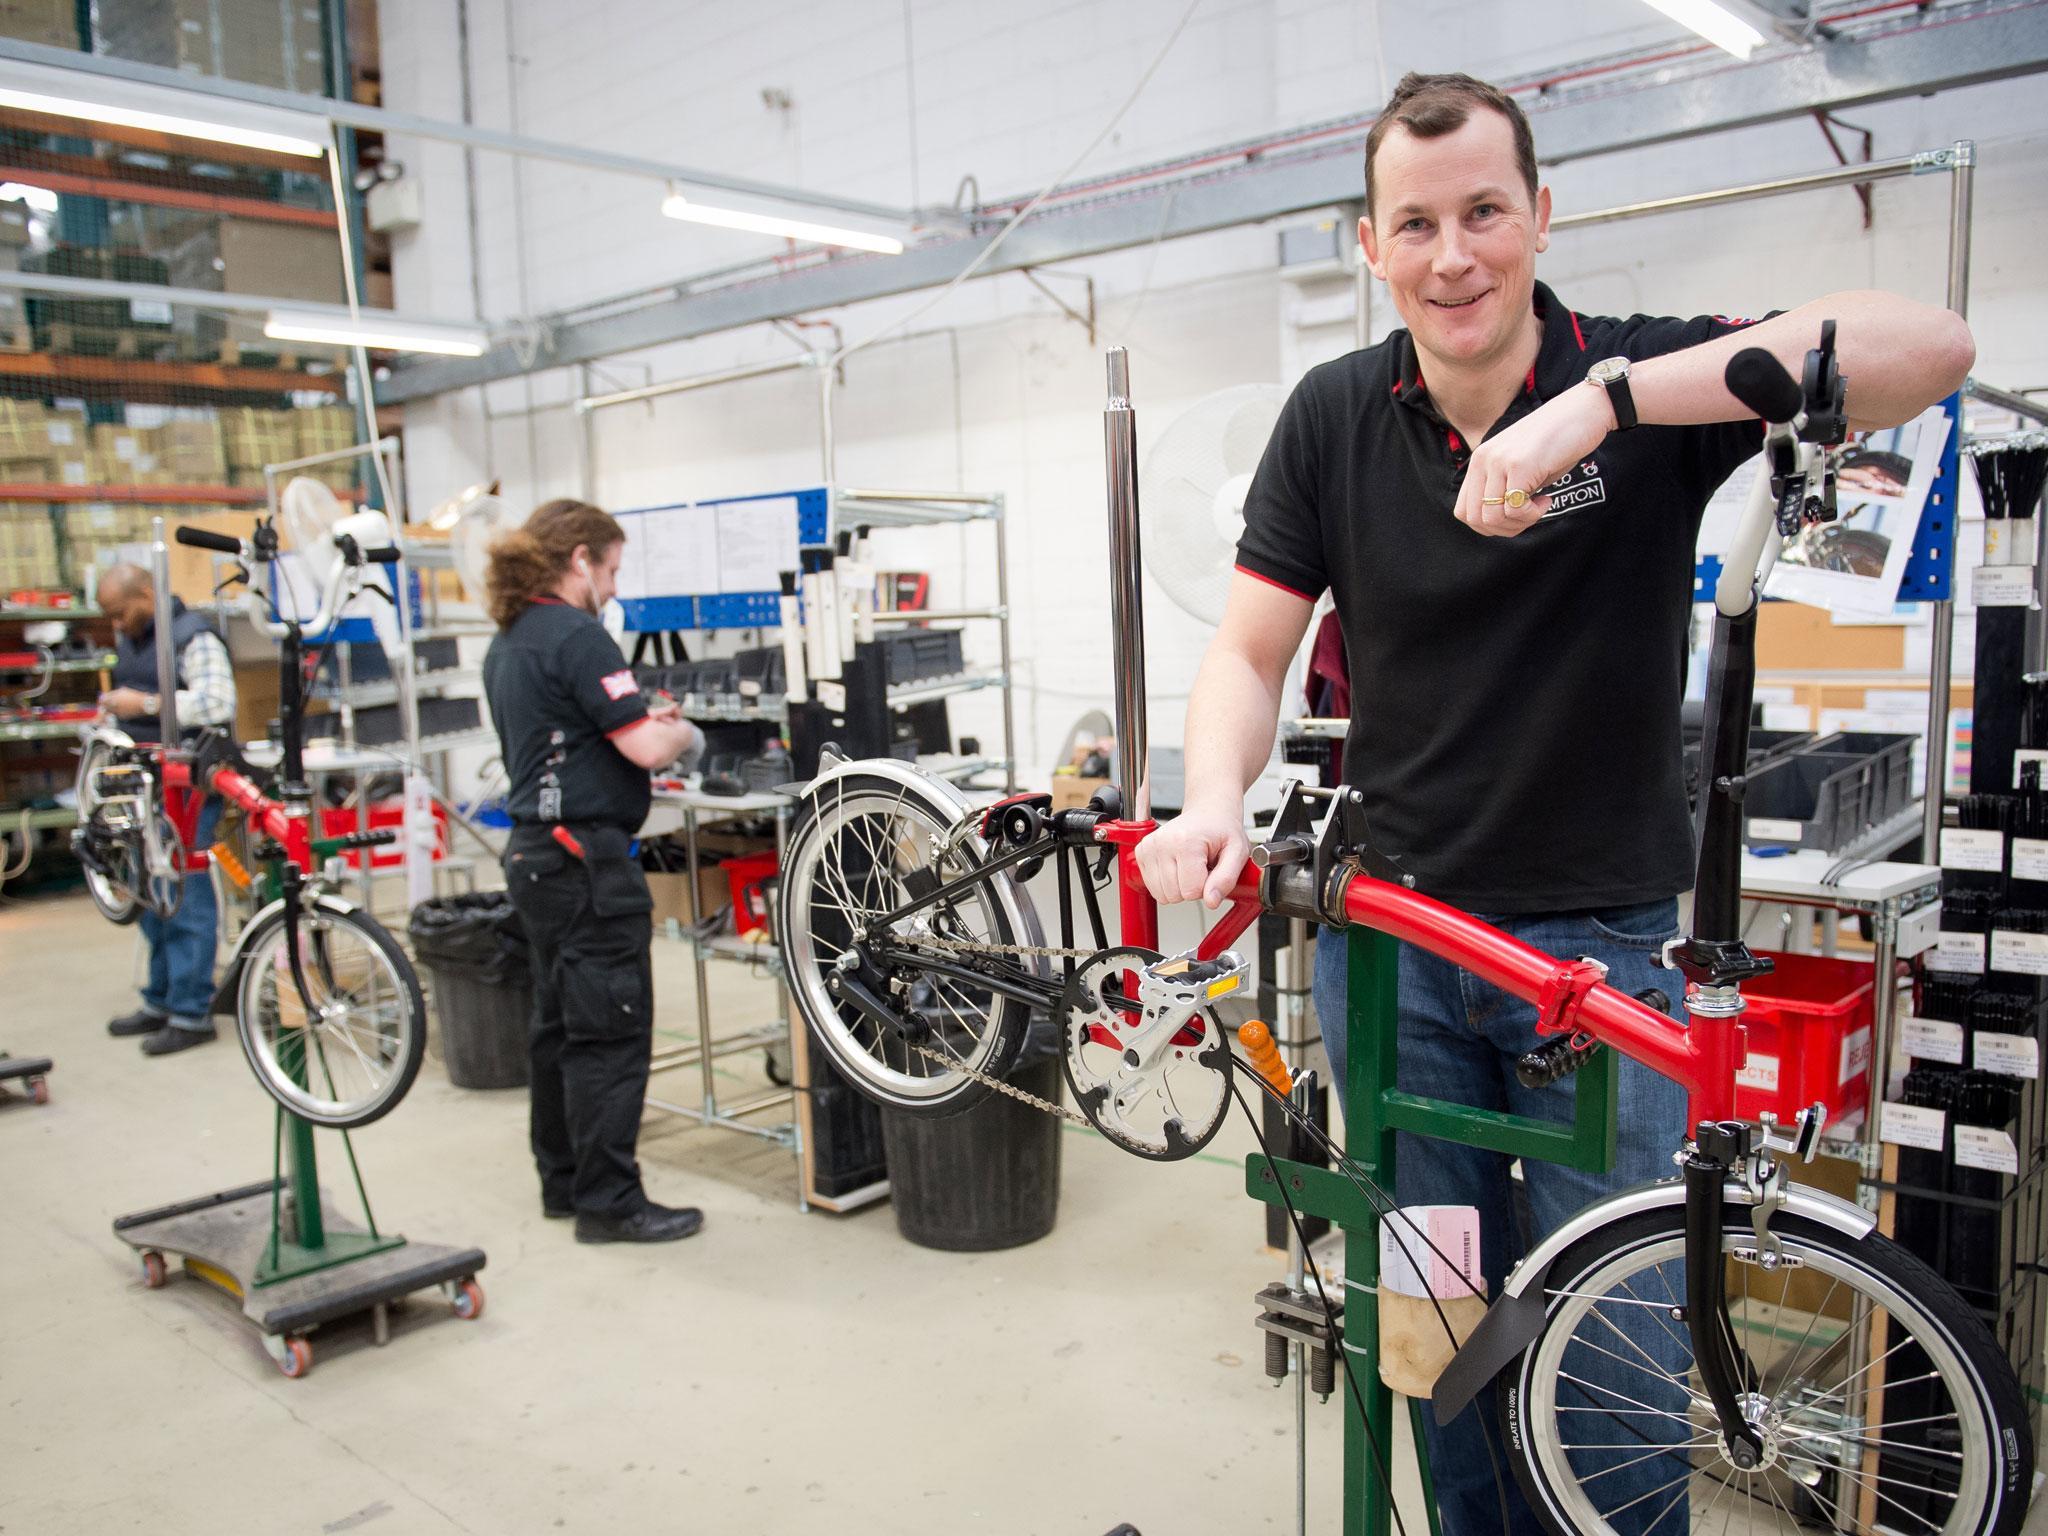 Will Butler-Adams, CEO of Brompton Bikes, at the company's headquarters in west London